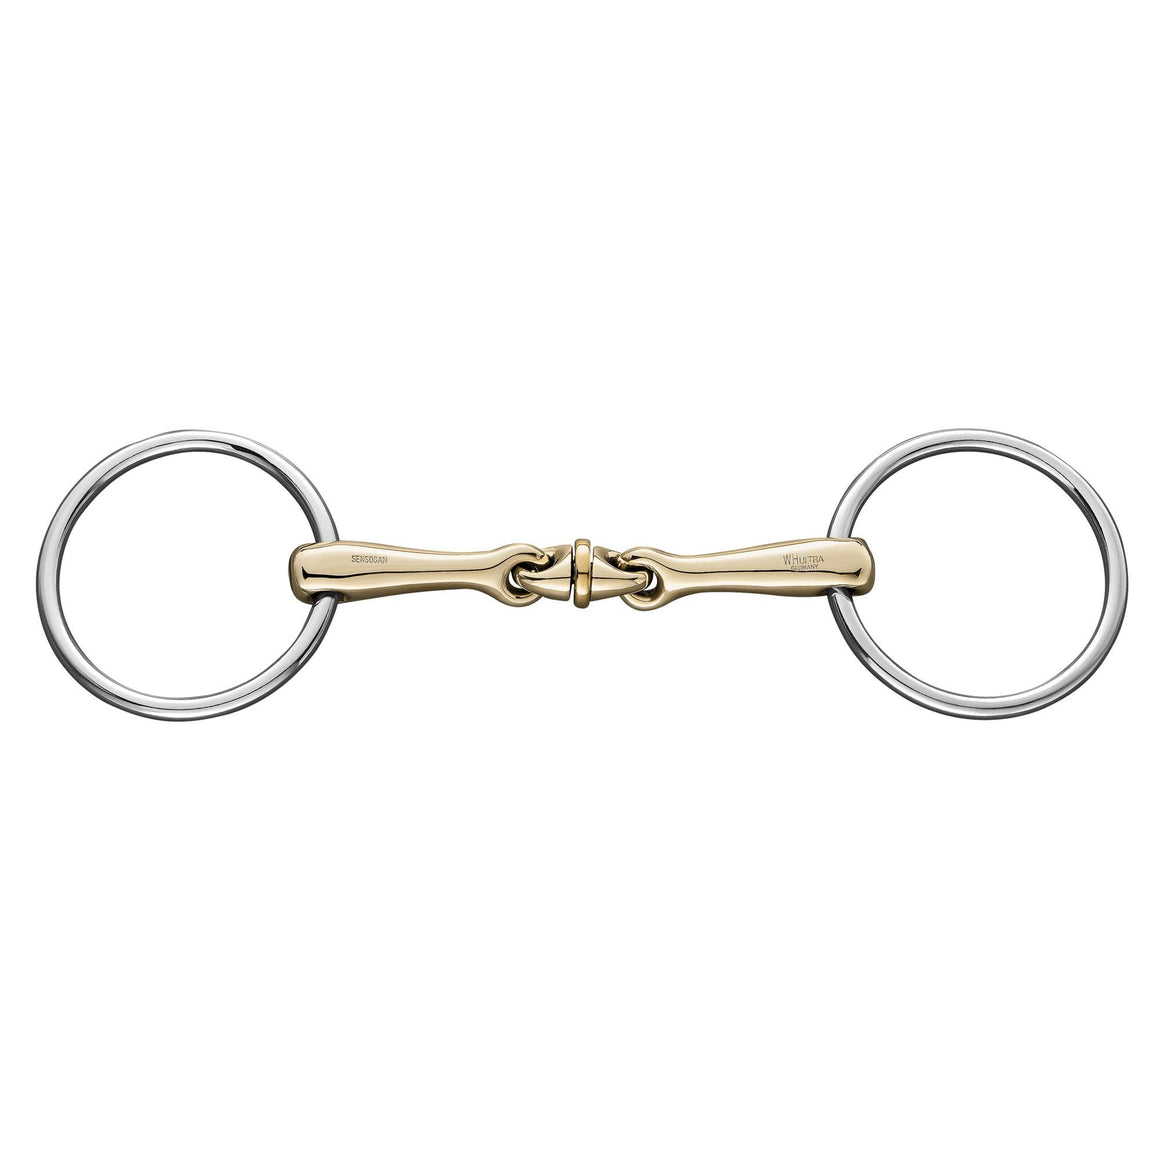 Sprenger Loose Ring Snaffle WH Ultra 14mm 40615